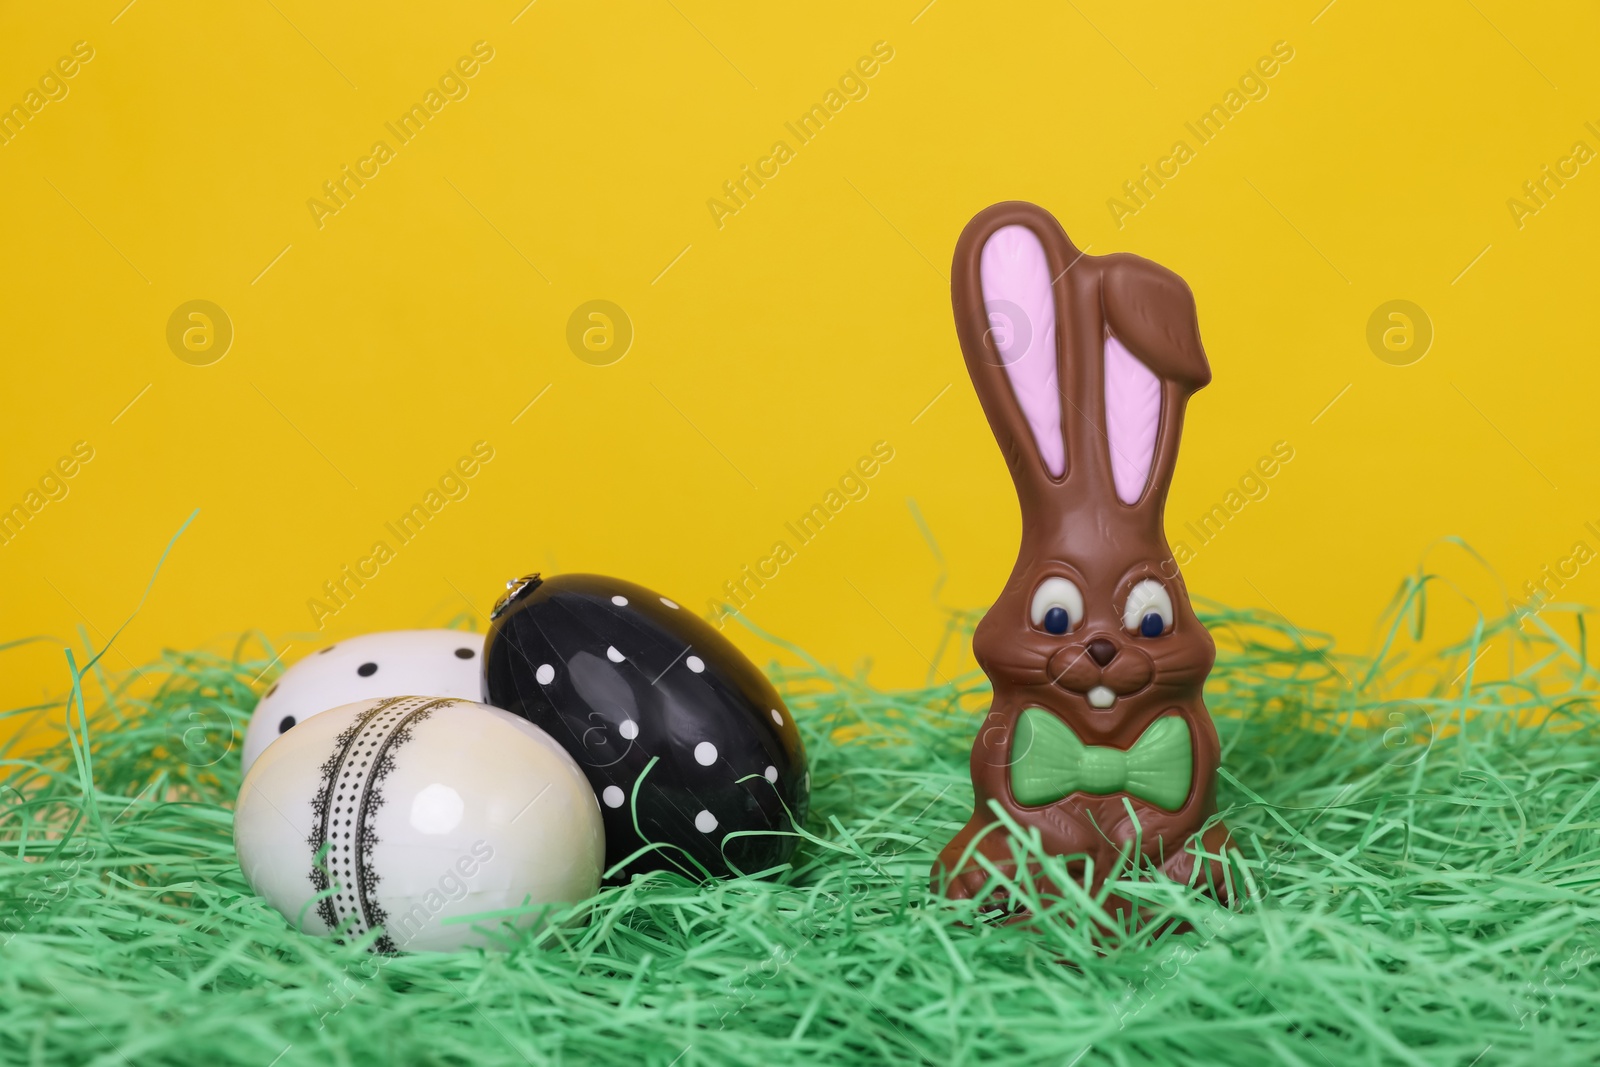 Photo of Easter celebration. Cute chocolate bunny and painted eggs on grass against yellow background, space for text